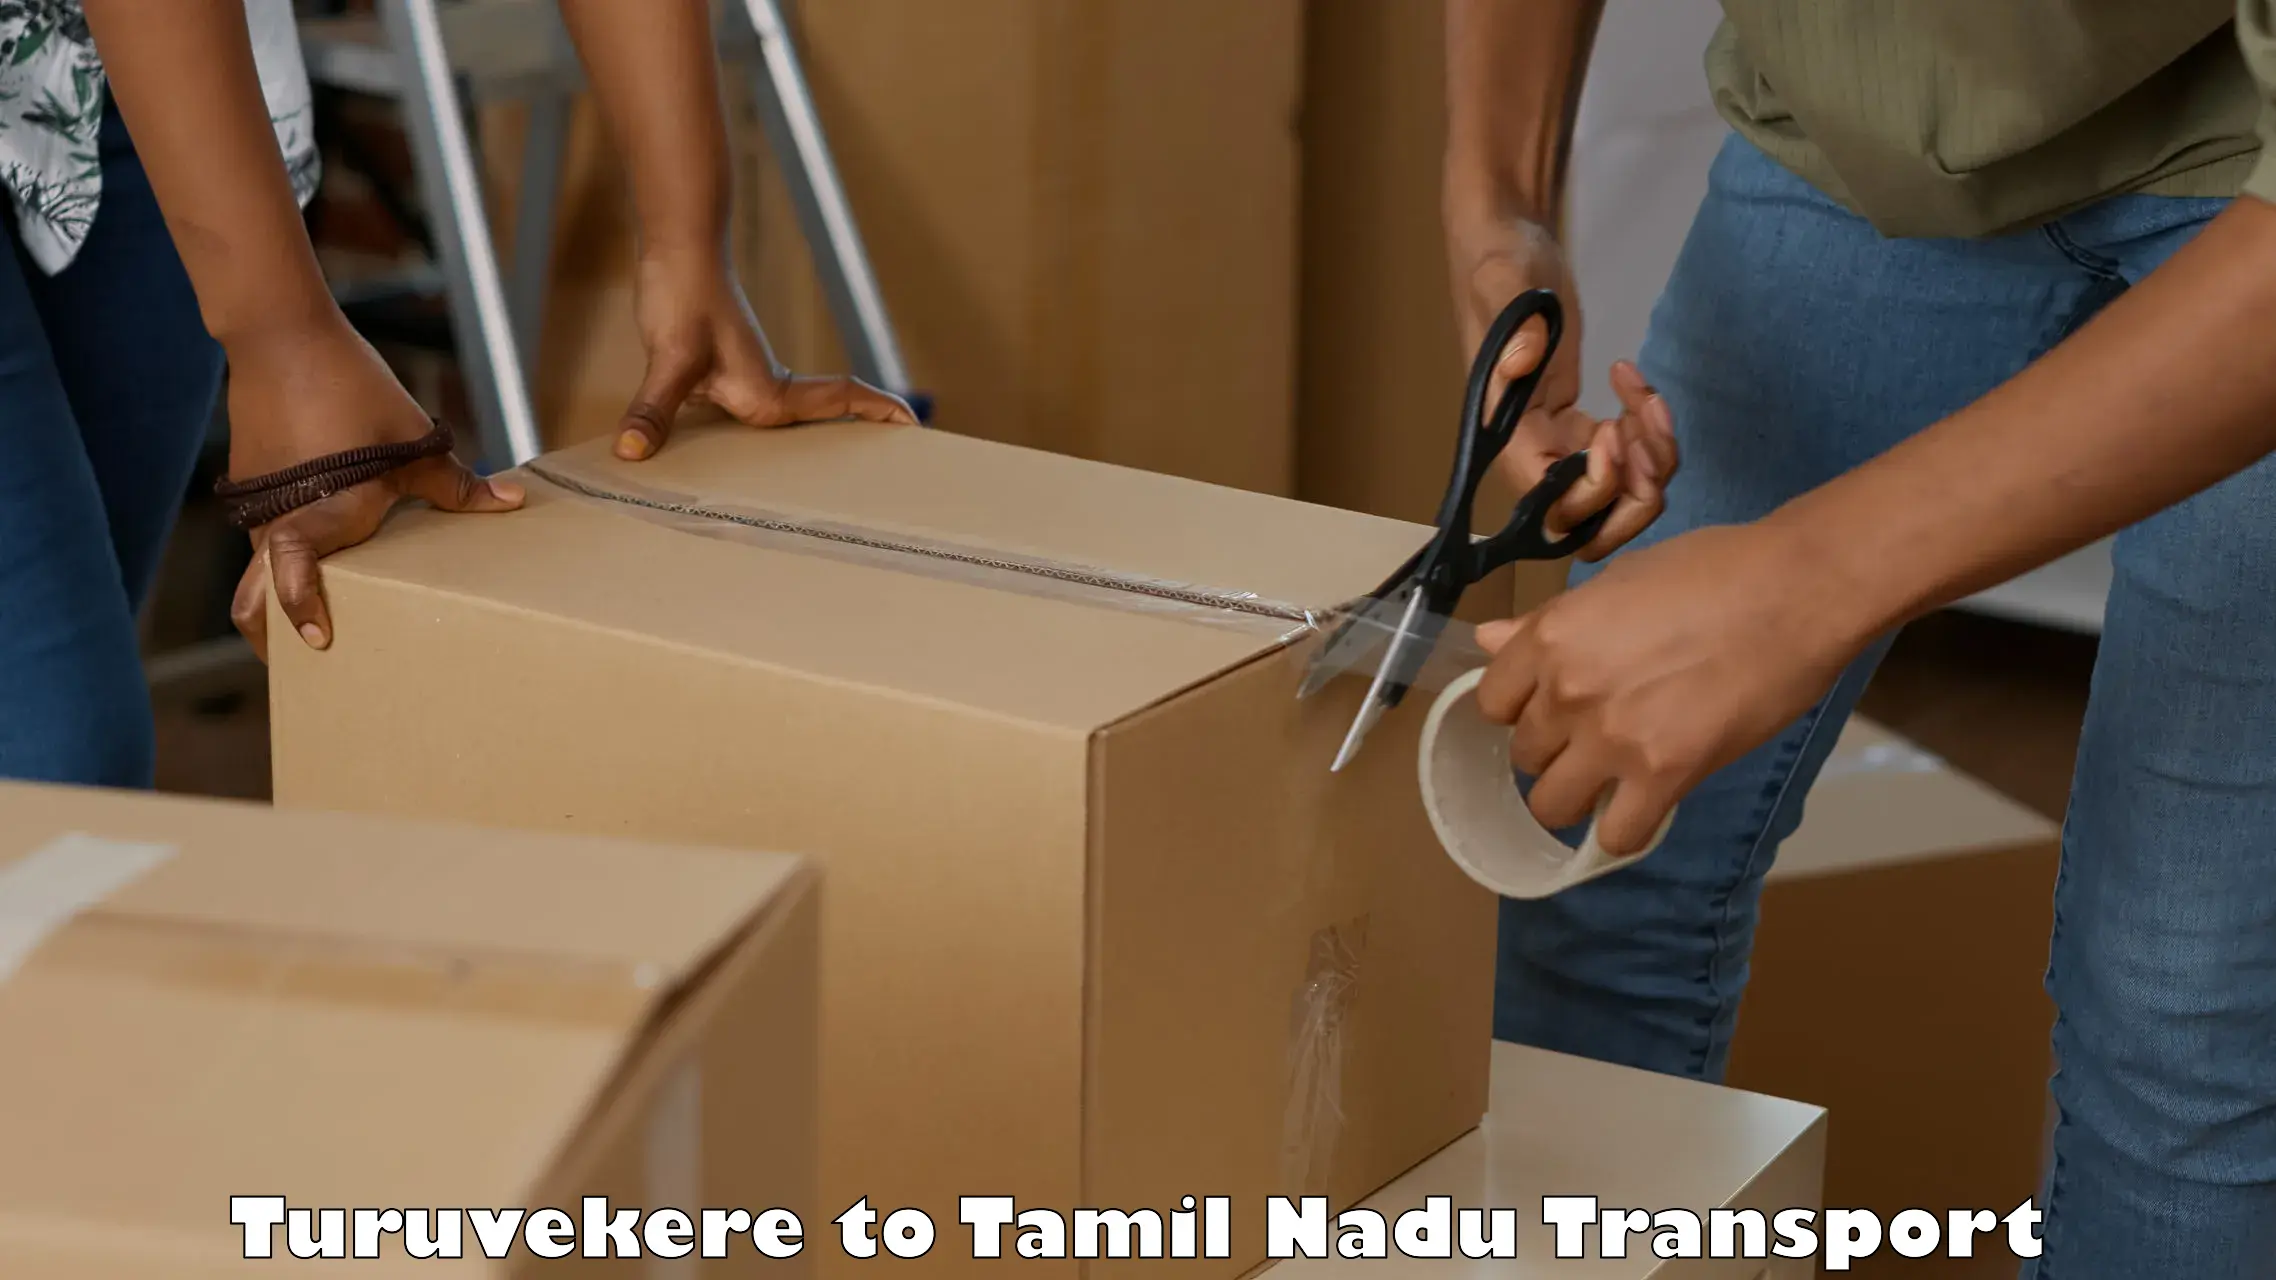 India truck logistics services Turuvekere to Vriddhachalam